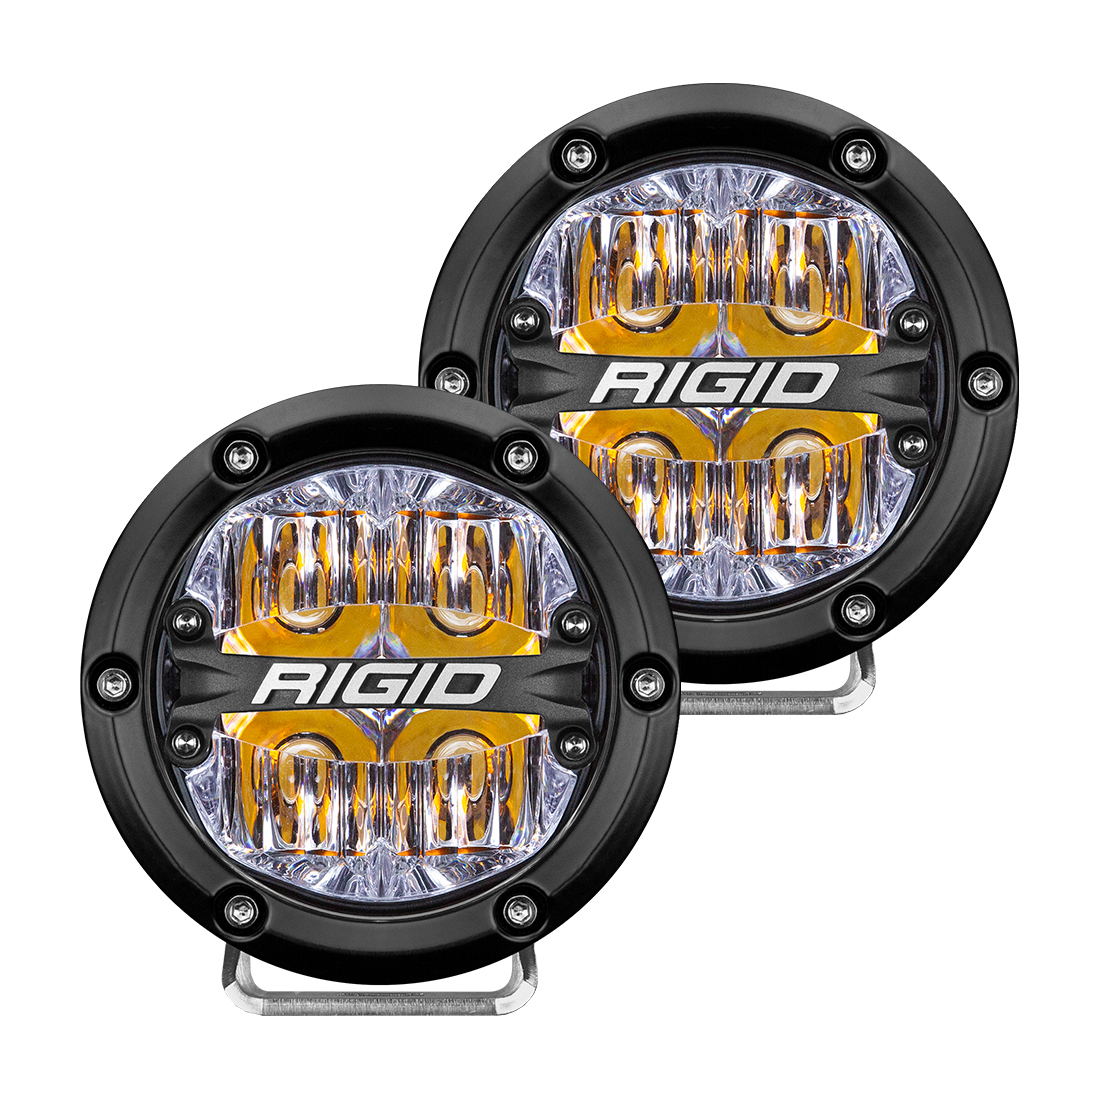 Rigid Industries 360-Series 4 Inch Led Off-Road Drive Beam Amber Backlight Pair